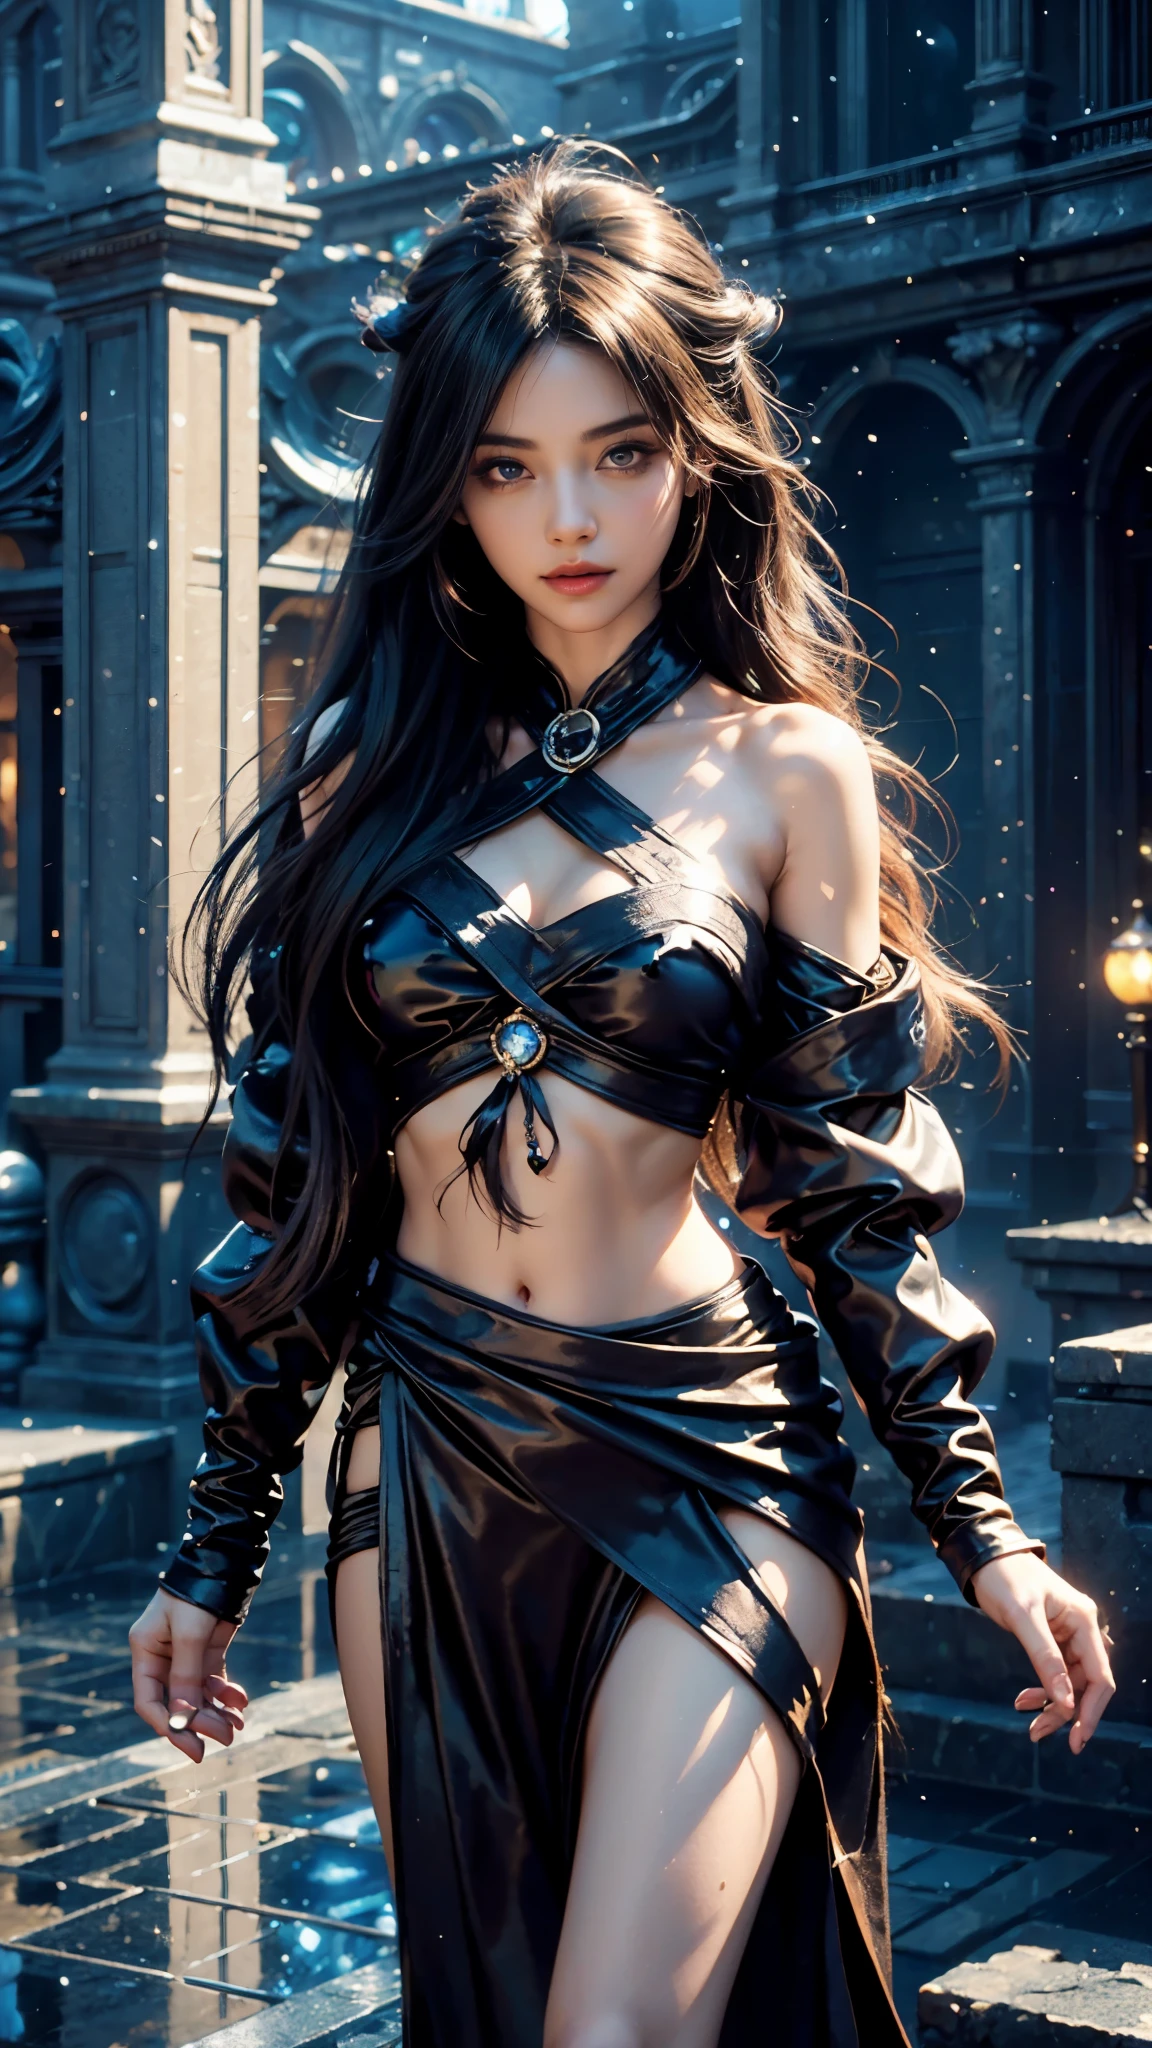 4k, UHD, masterpiece, 1 girl, good face, ((detailed eyes)), very long hair, impressive hairstyle, perfect brasts, ((fantasy cosplay)), black cosplay, (bare waist:1.4), night city, building, lamps, depth of field, reflection light, sparkle, chromatic aberration,